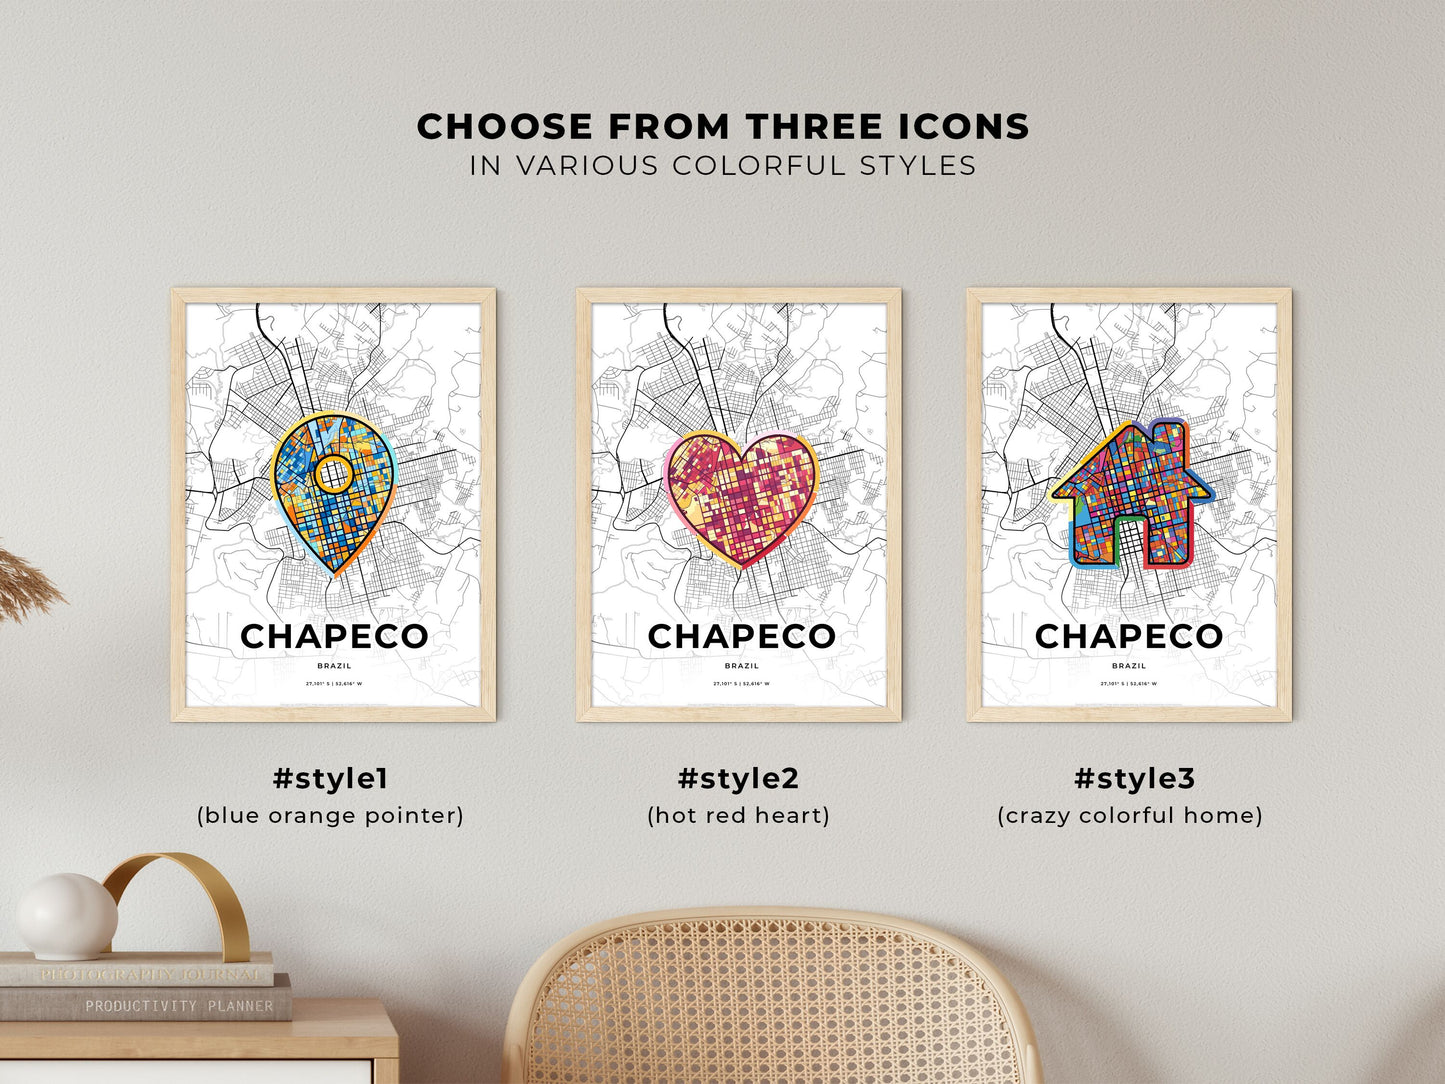 CHAPECO BRAZIL minimal art map with a colorful icon. Where it all began, Couple map gift.